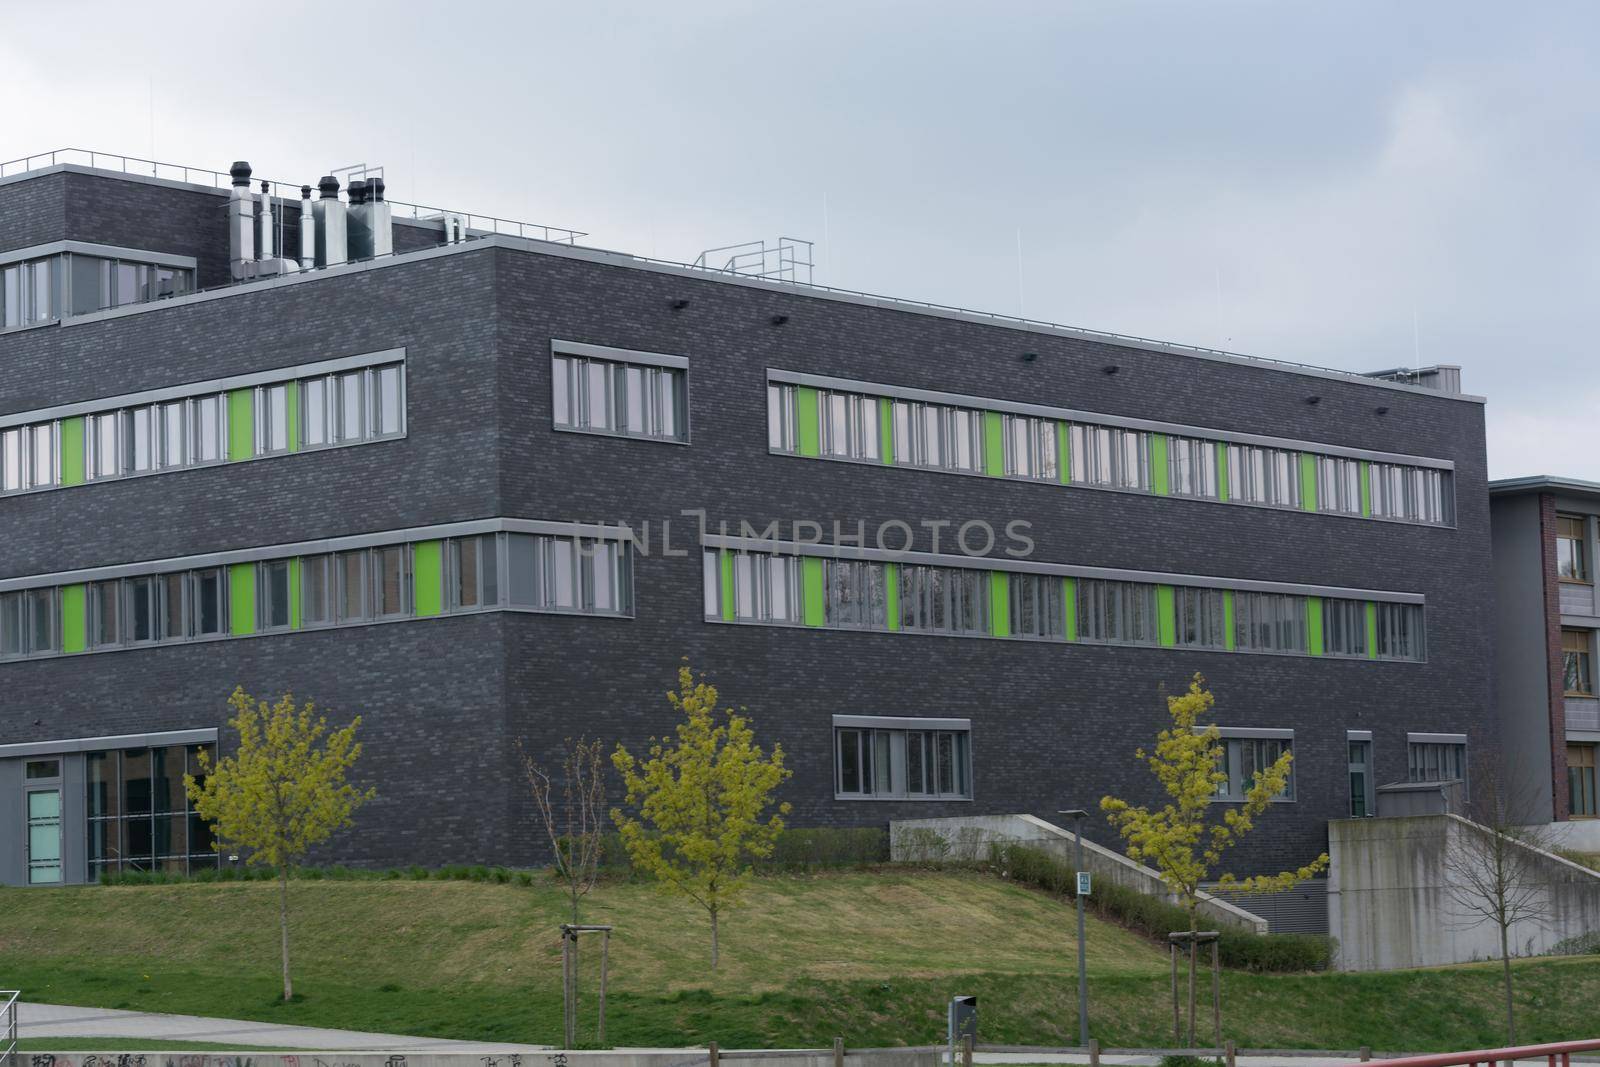 Modern campus of the cities of Velbert and Heiligenhaus is a branch of the University of Bochum